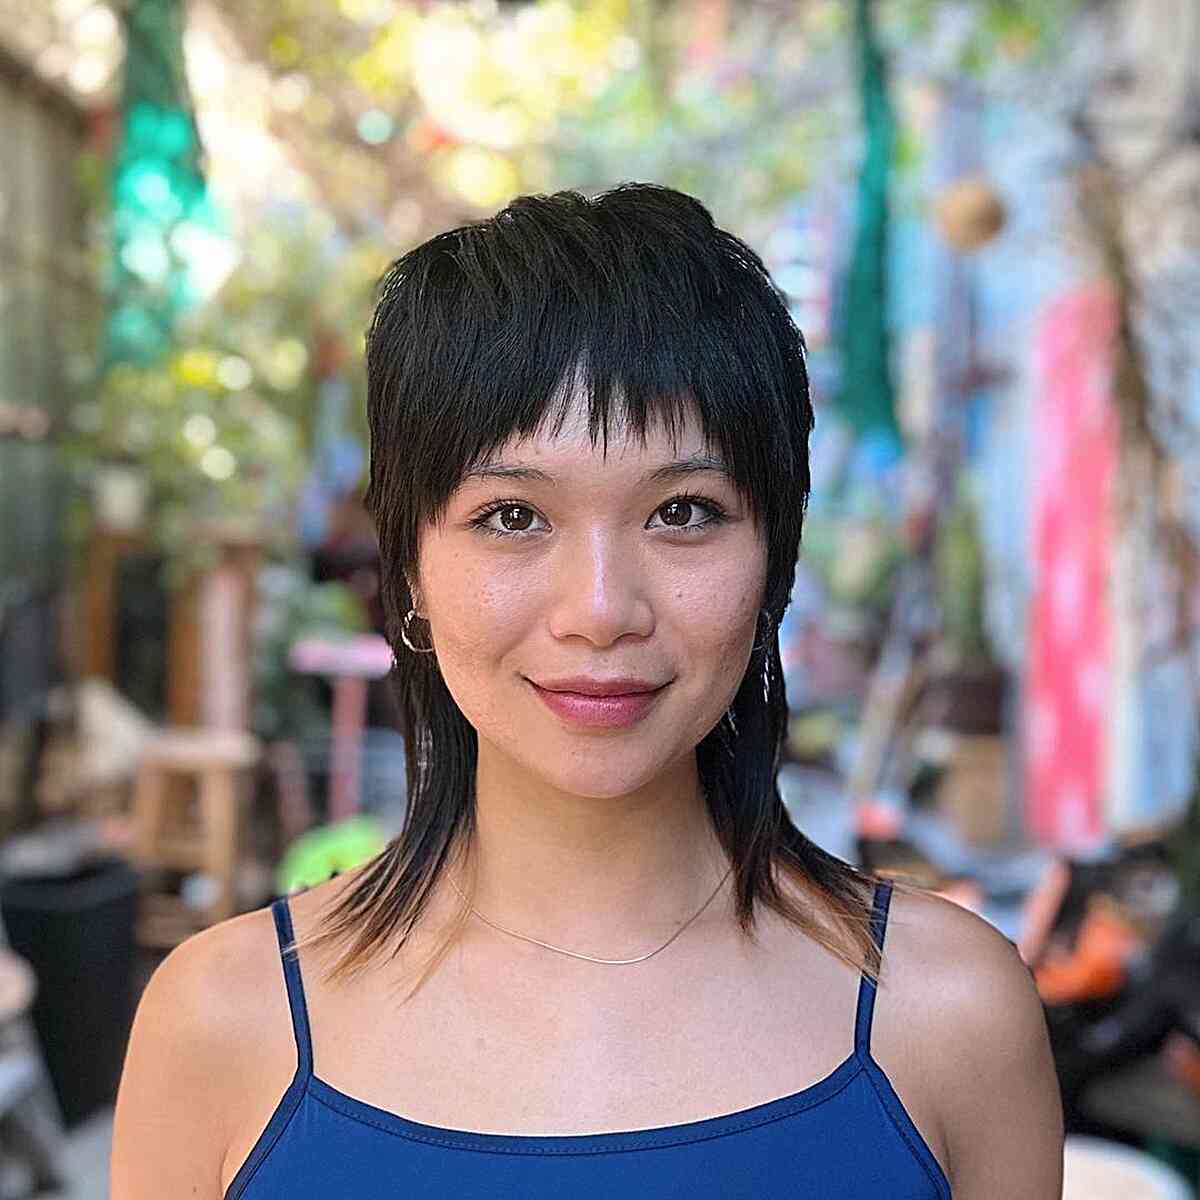 The Shixie Mullet Cut for women with an edgy vibe